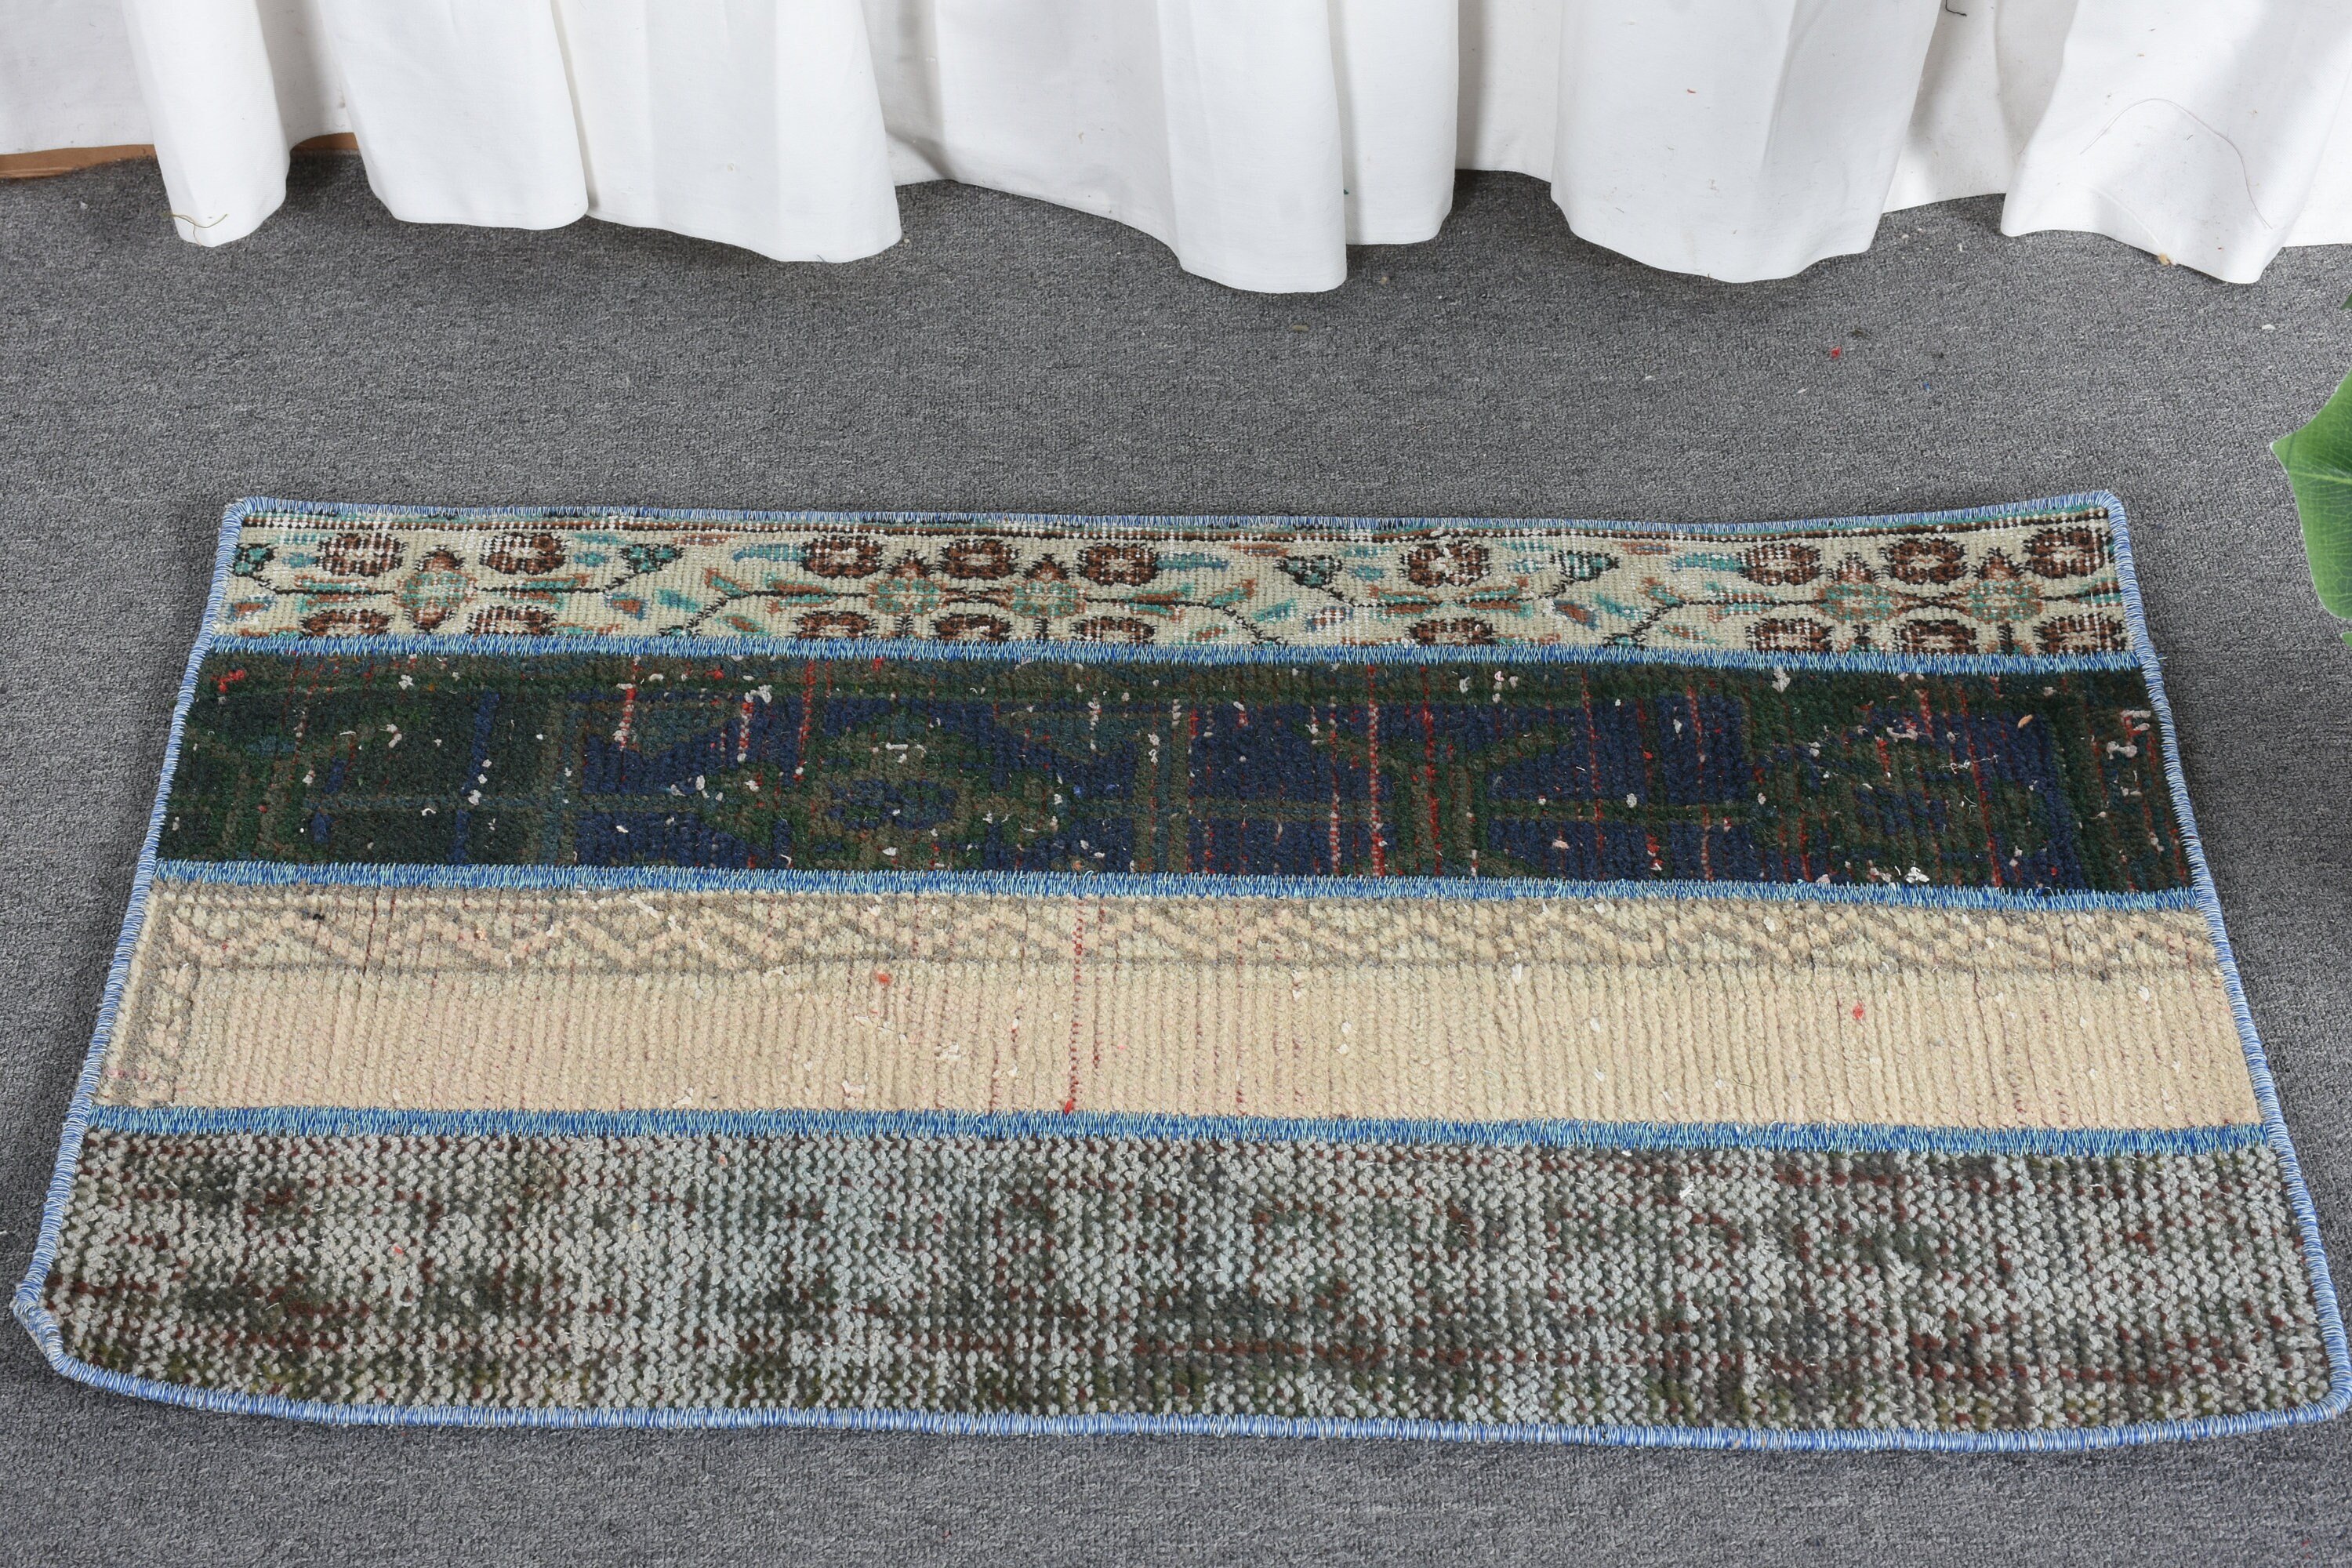 Moroccan Rug, Vintage Rug, 1.8x2.9 ft Small Rugs, Bedroom Rugs, Blue Antique Rugs, Turkish Rug, Kitchen Rugs, Rugs for Bath, Entry Rugs